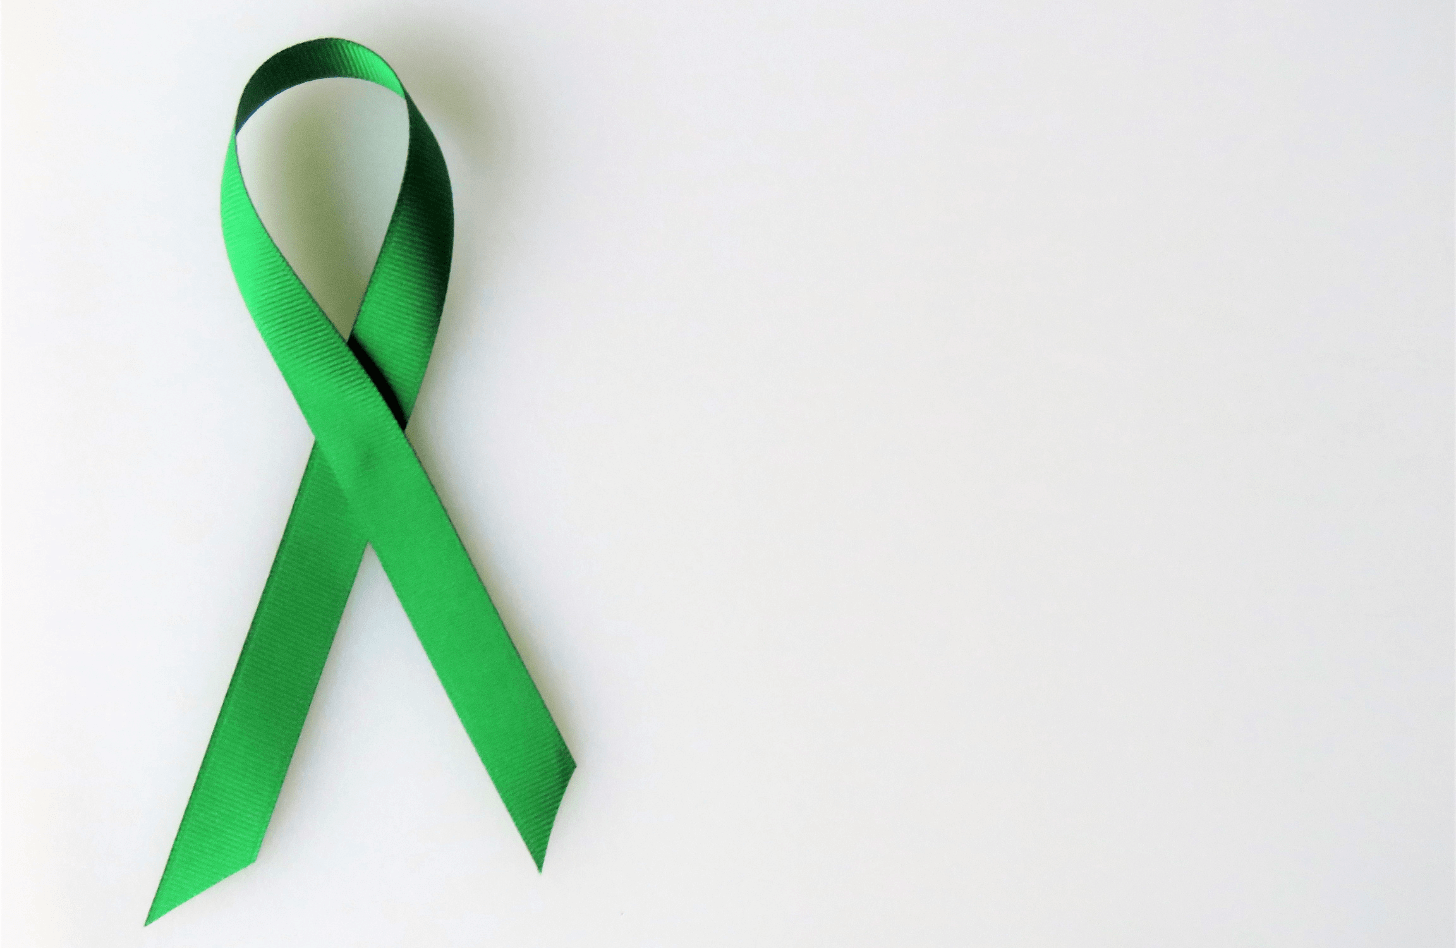 Green awareness ribbon against a white background